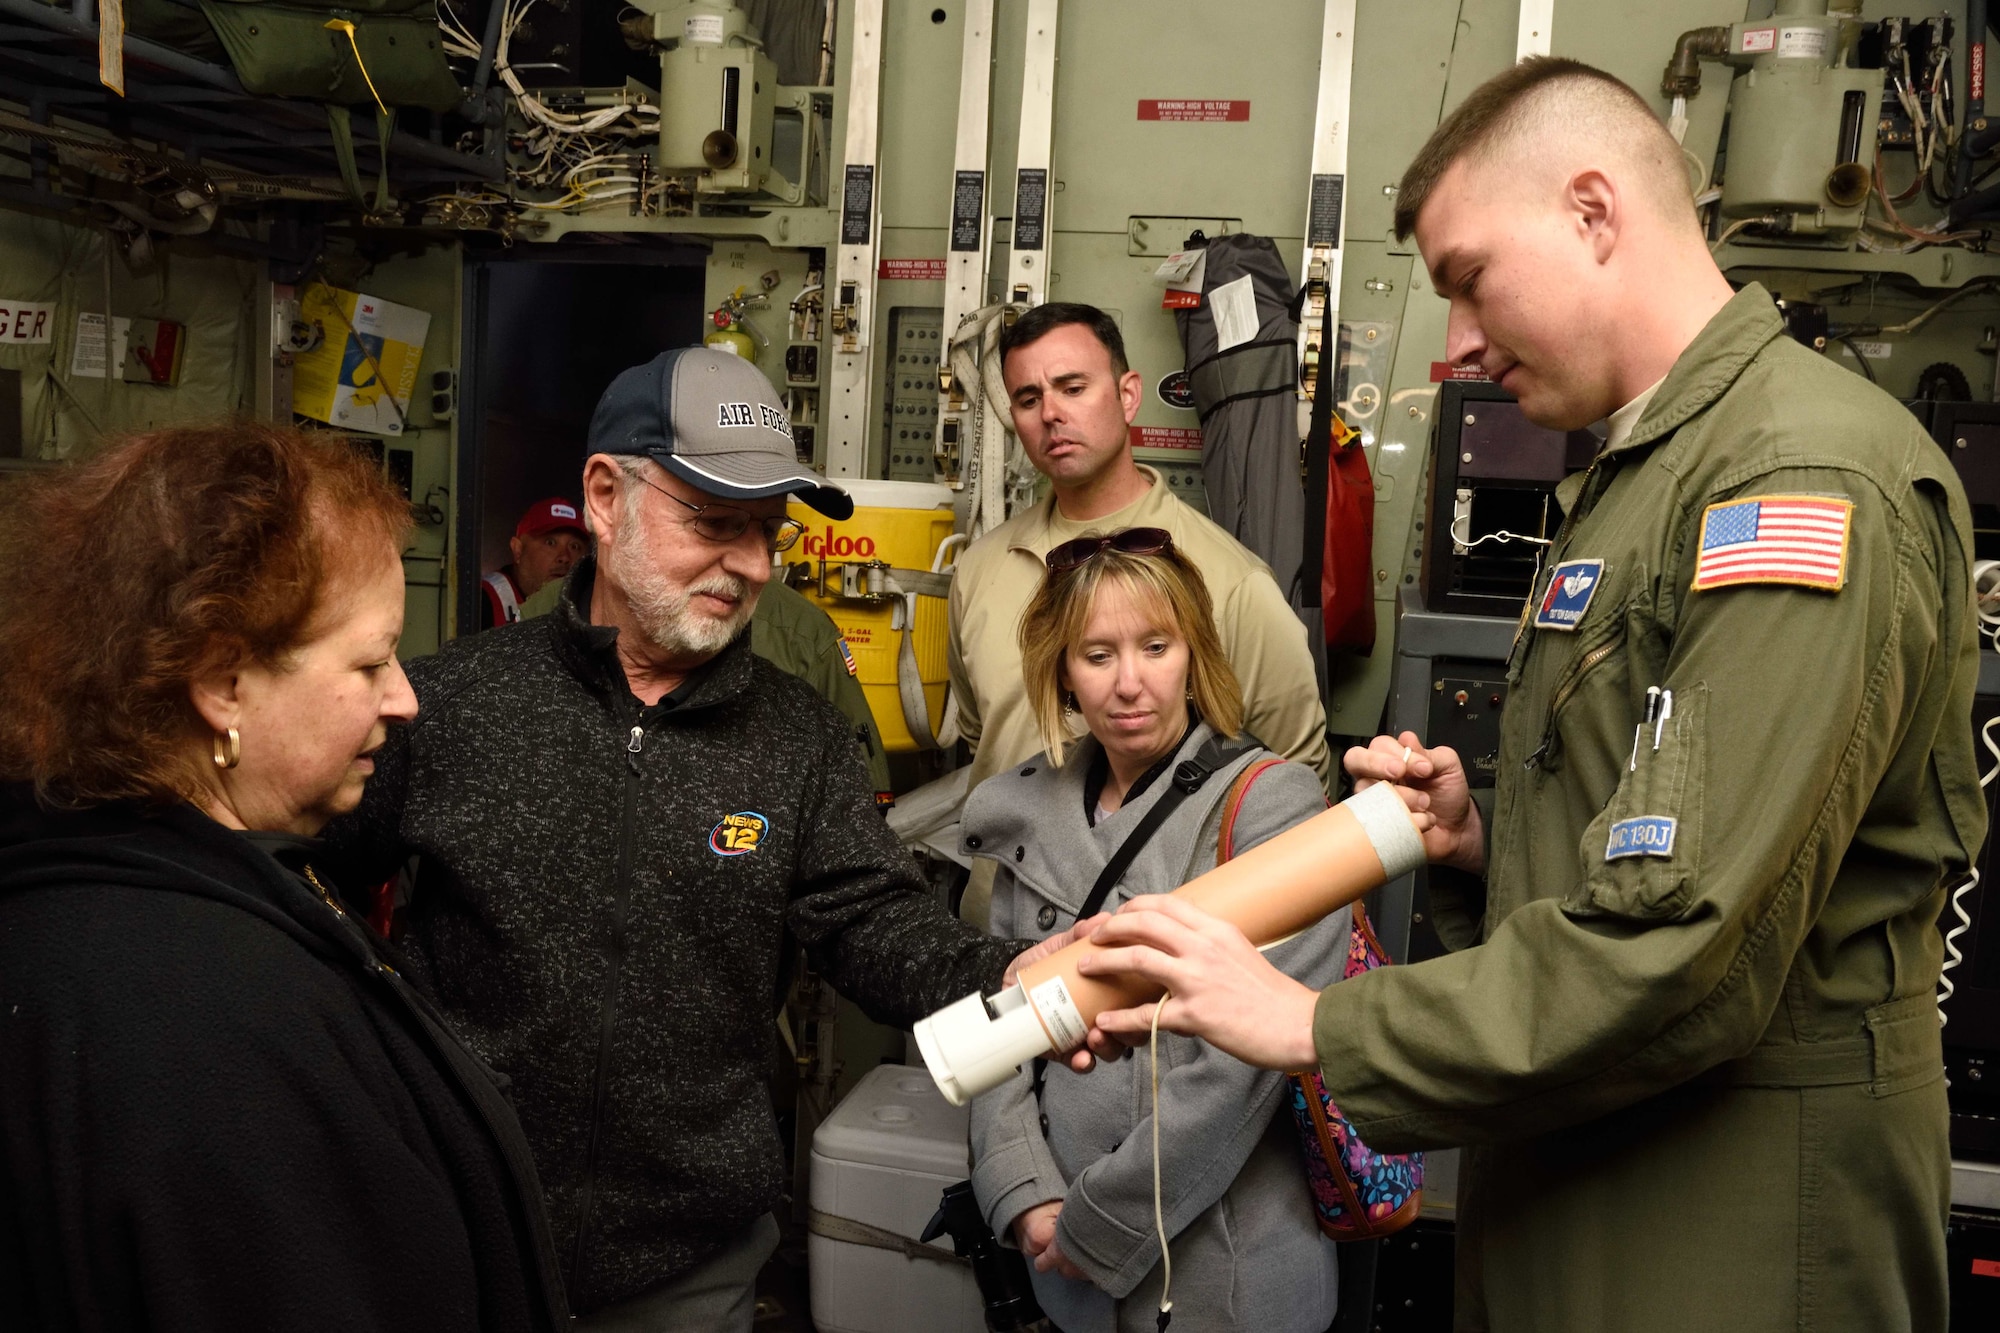 Tech. Sgt. Thomas Barnaby, 53rd Weather Reconnaissance Squadron weather reconnaissance loadmaster, talks to members of the media and public about the weather-data-gathering instrument called the dropsonde in Islip, New York, during the 2017 Hurricane Awareness Tour May 8, 2017. The purpose of the tour, which ran from May 6-12, 2017, was to focus attention on the approaching hurricane season and on protecting communities through preparedness and awareness. (U.S. Air Force photo/Tech. Sgt. Ryan Labadens)